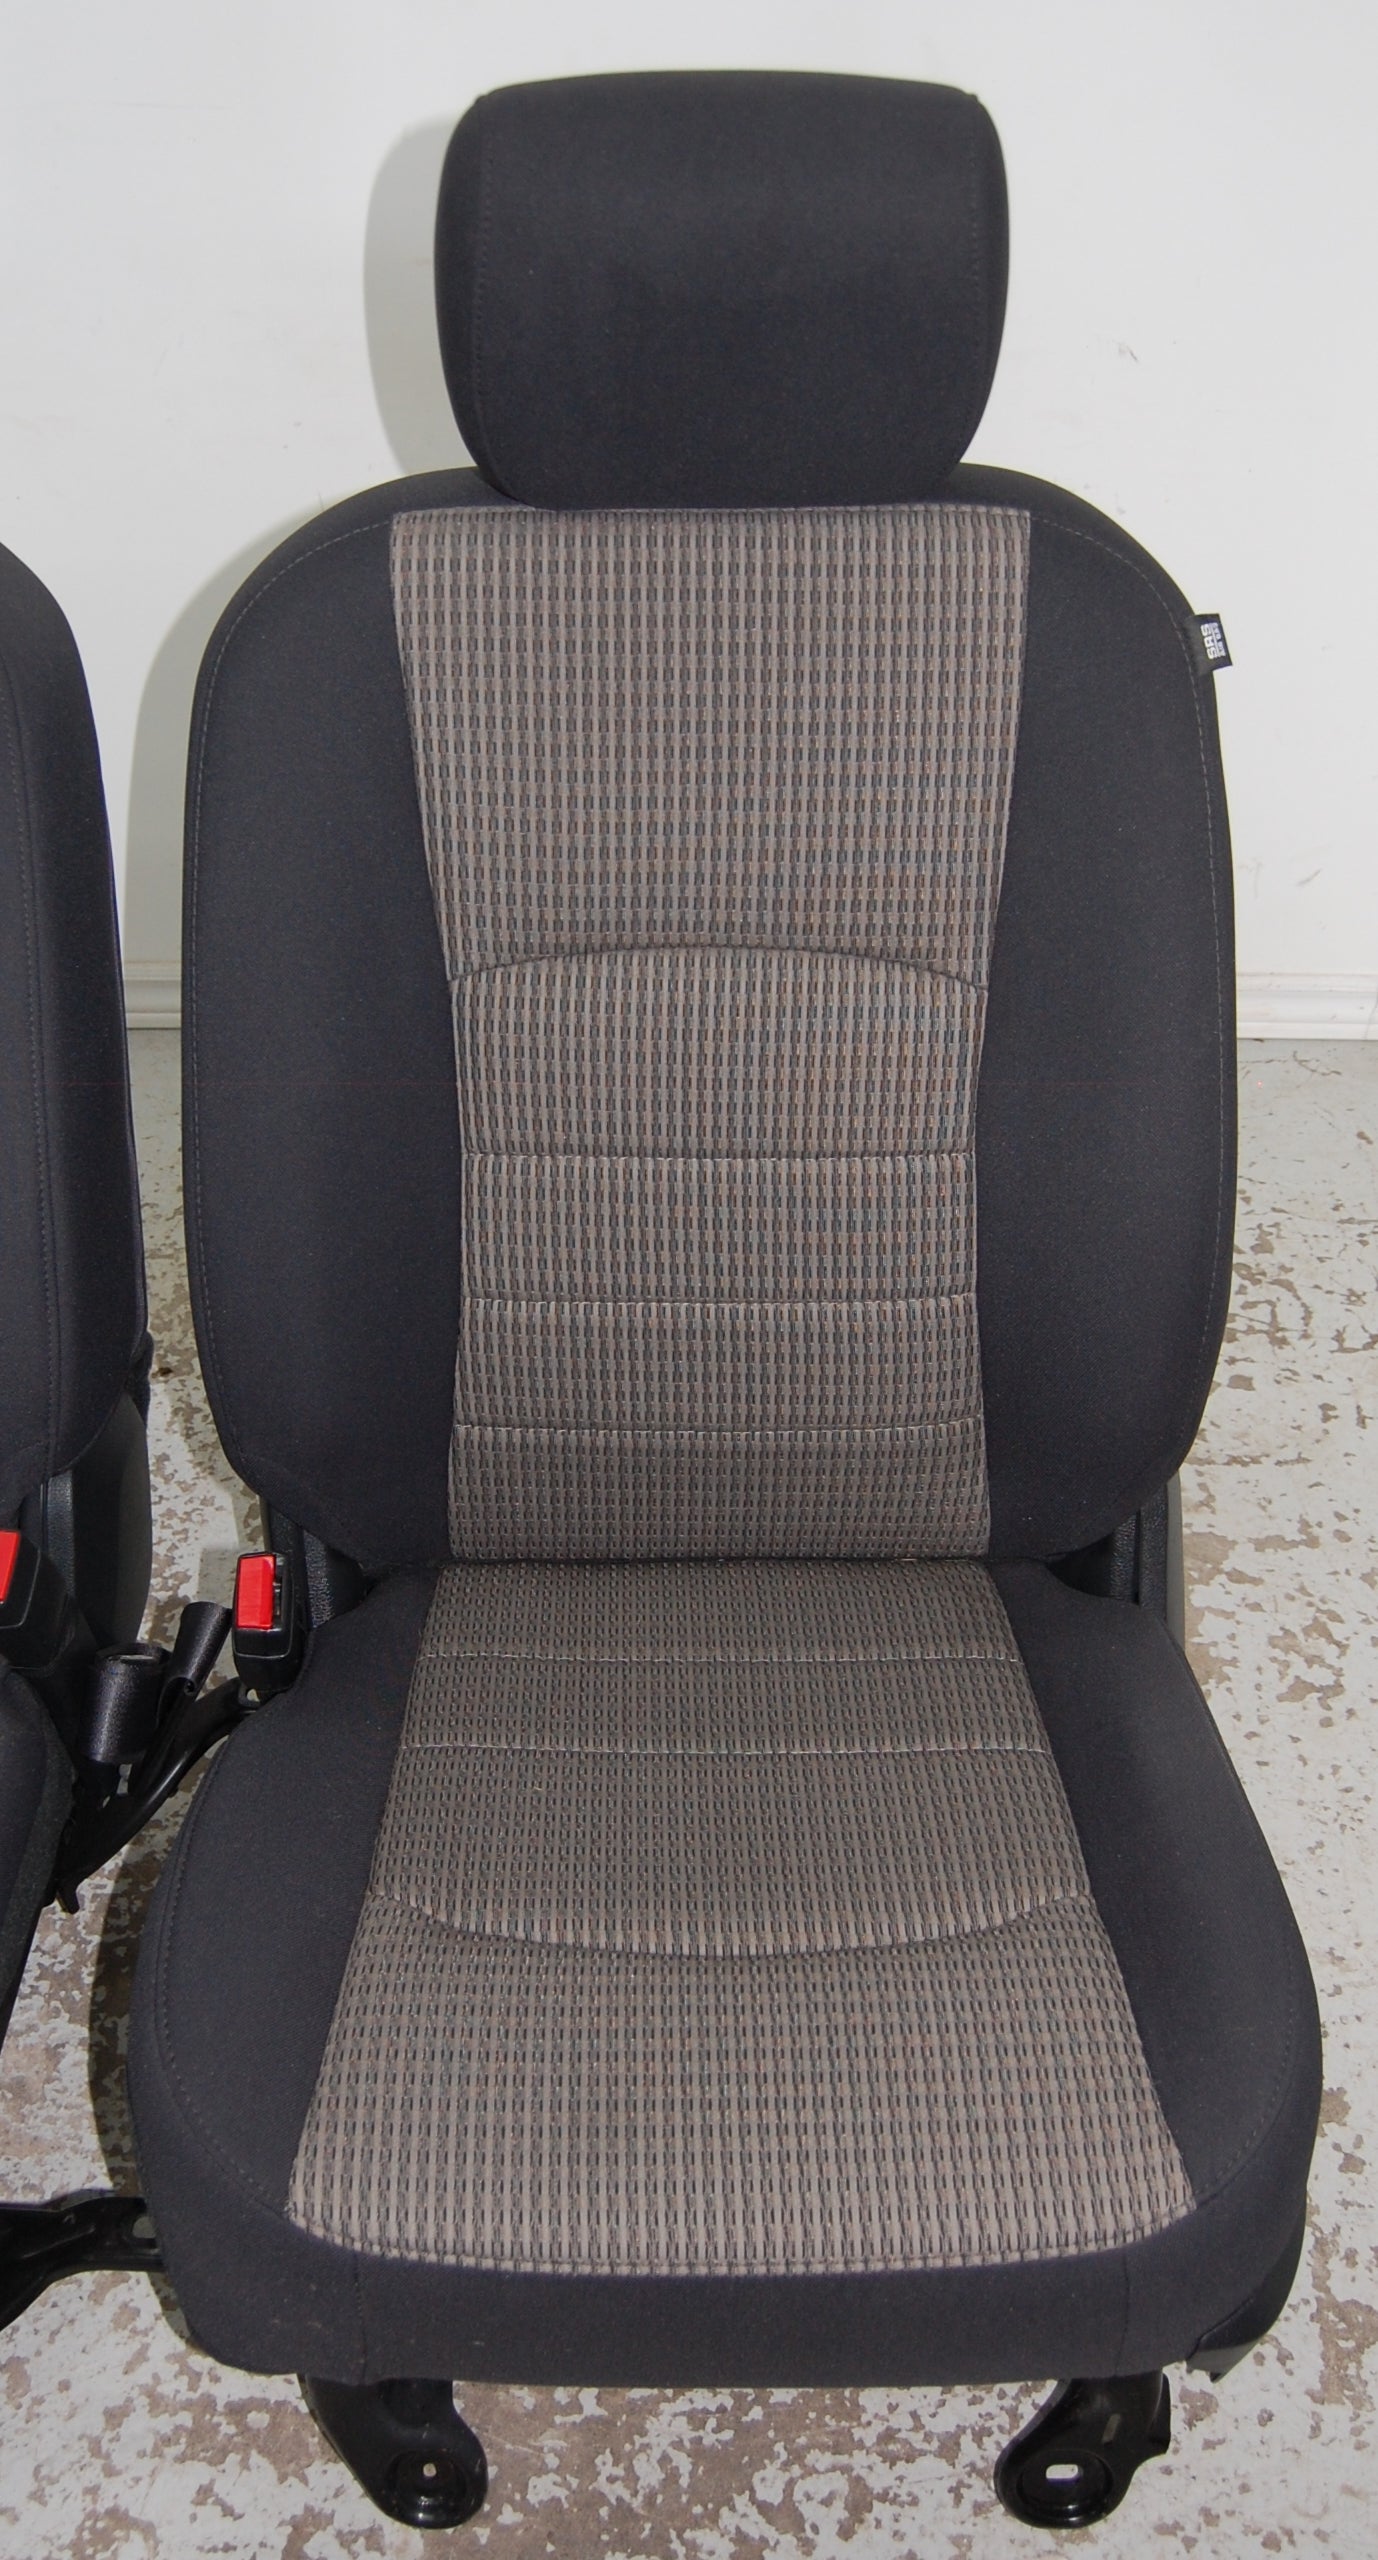 Dodge Ram 2016 Truck Power Cloth Seats with Airbags 2009-17